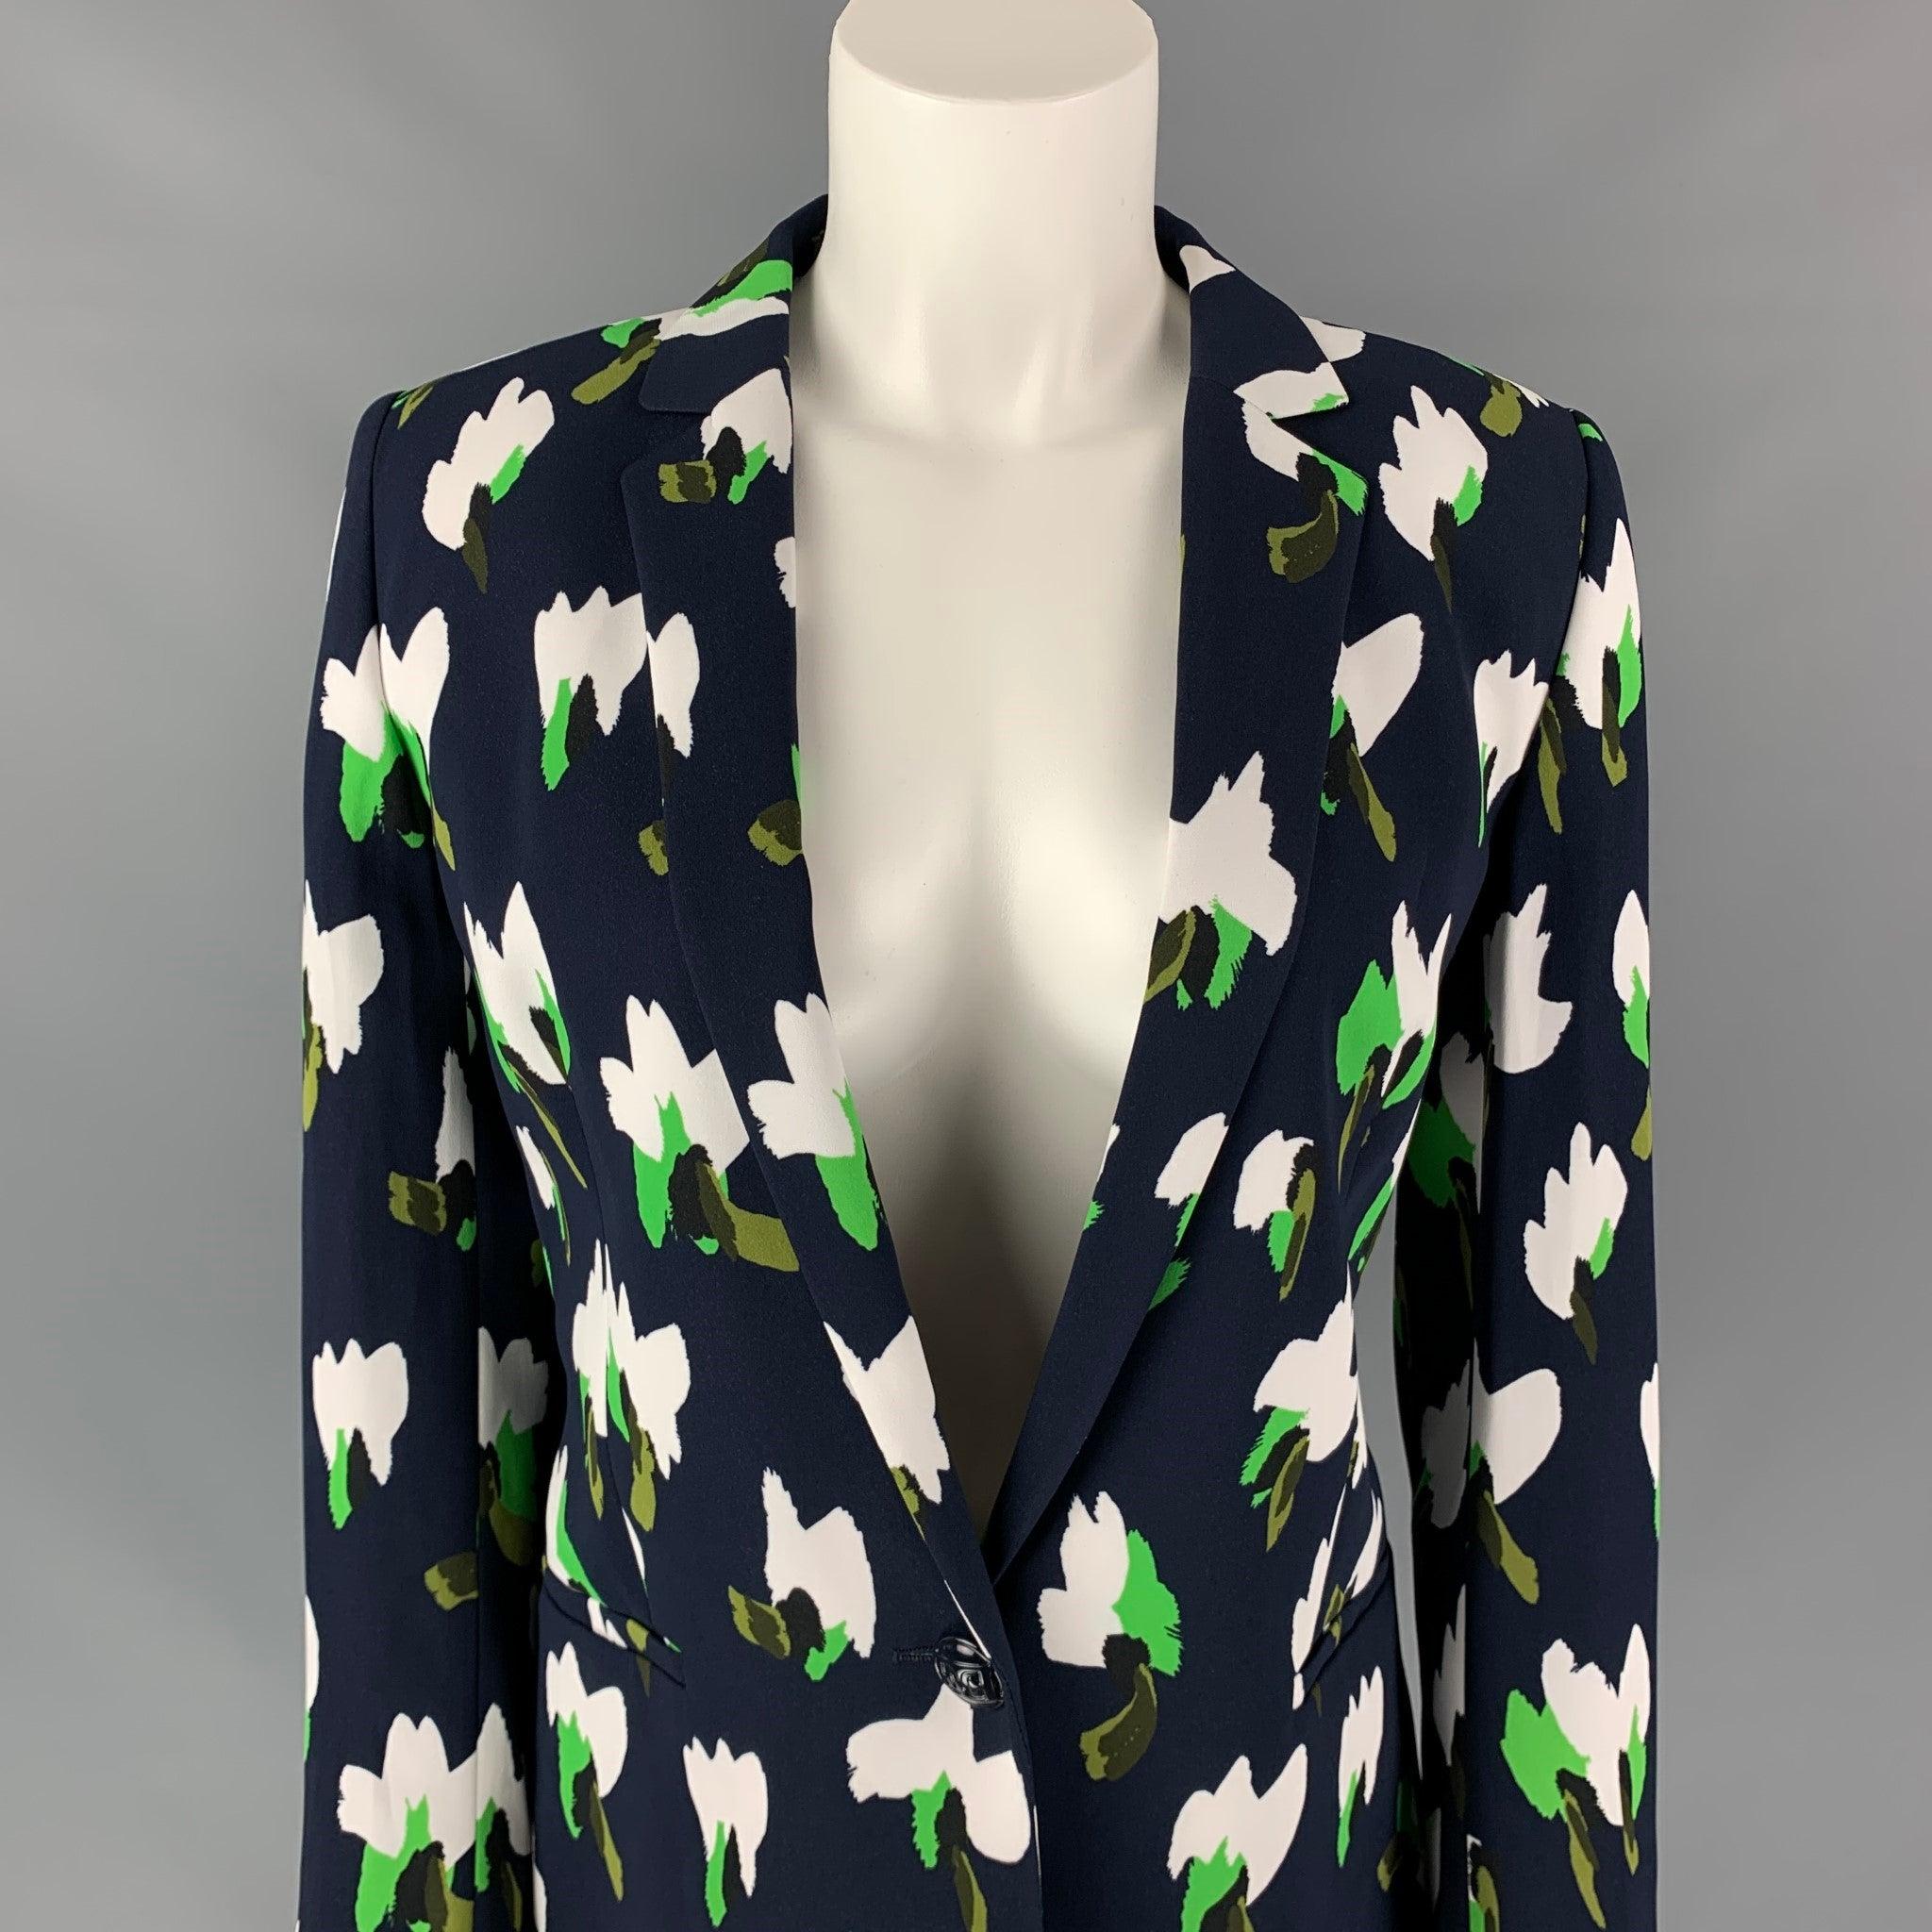 ESCADA jacket comes in a navy & white abstract print viscose with no liner featuring a oversized fit, notch lapel, slit pockets, and a single button closure.
New Without Tags.
 

Marked:   36 

Measurements: 
 
Shoulder: 15.5 inches  Bust: 40 inches